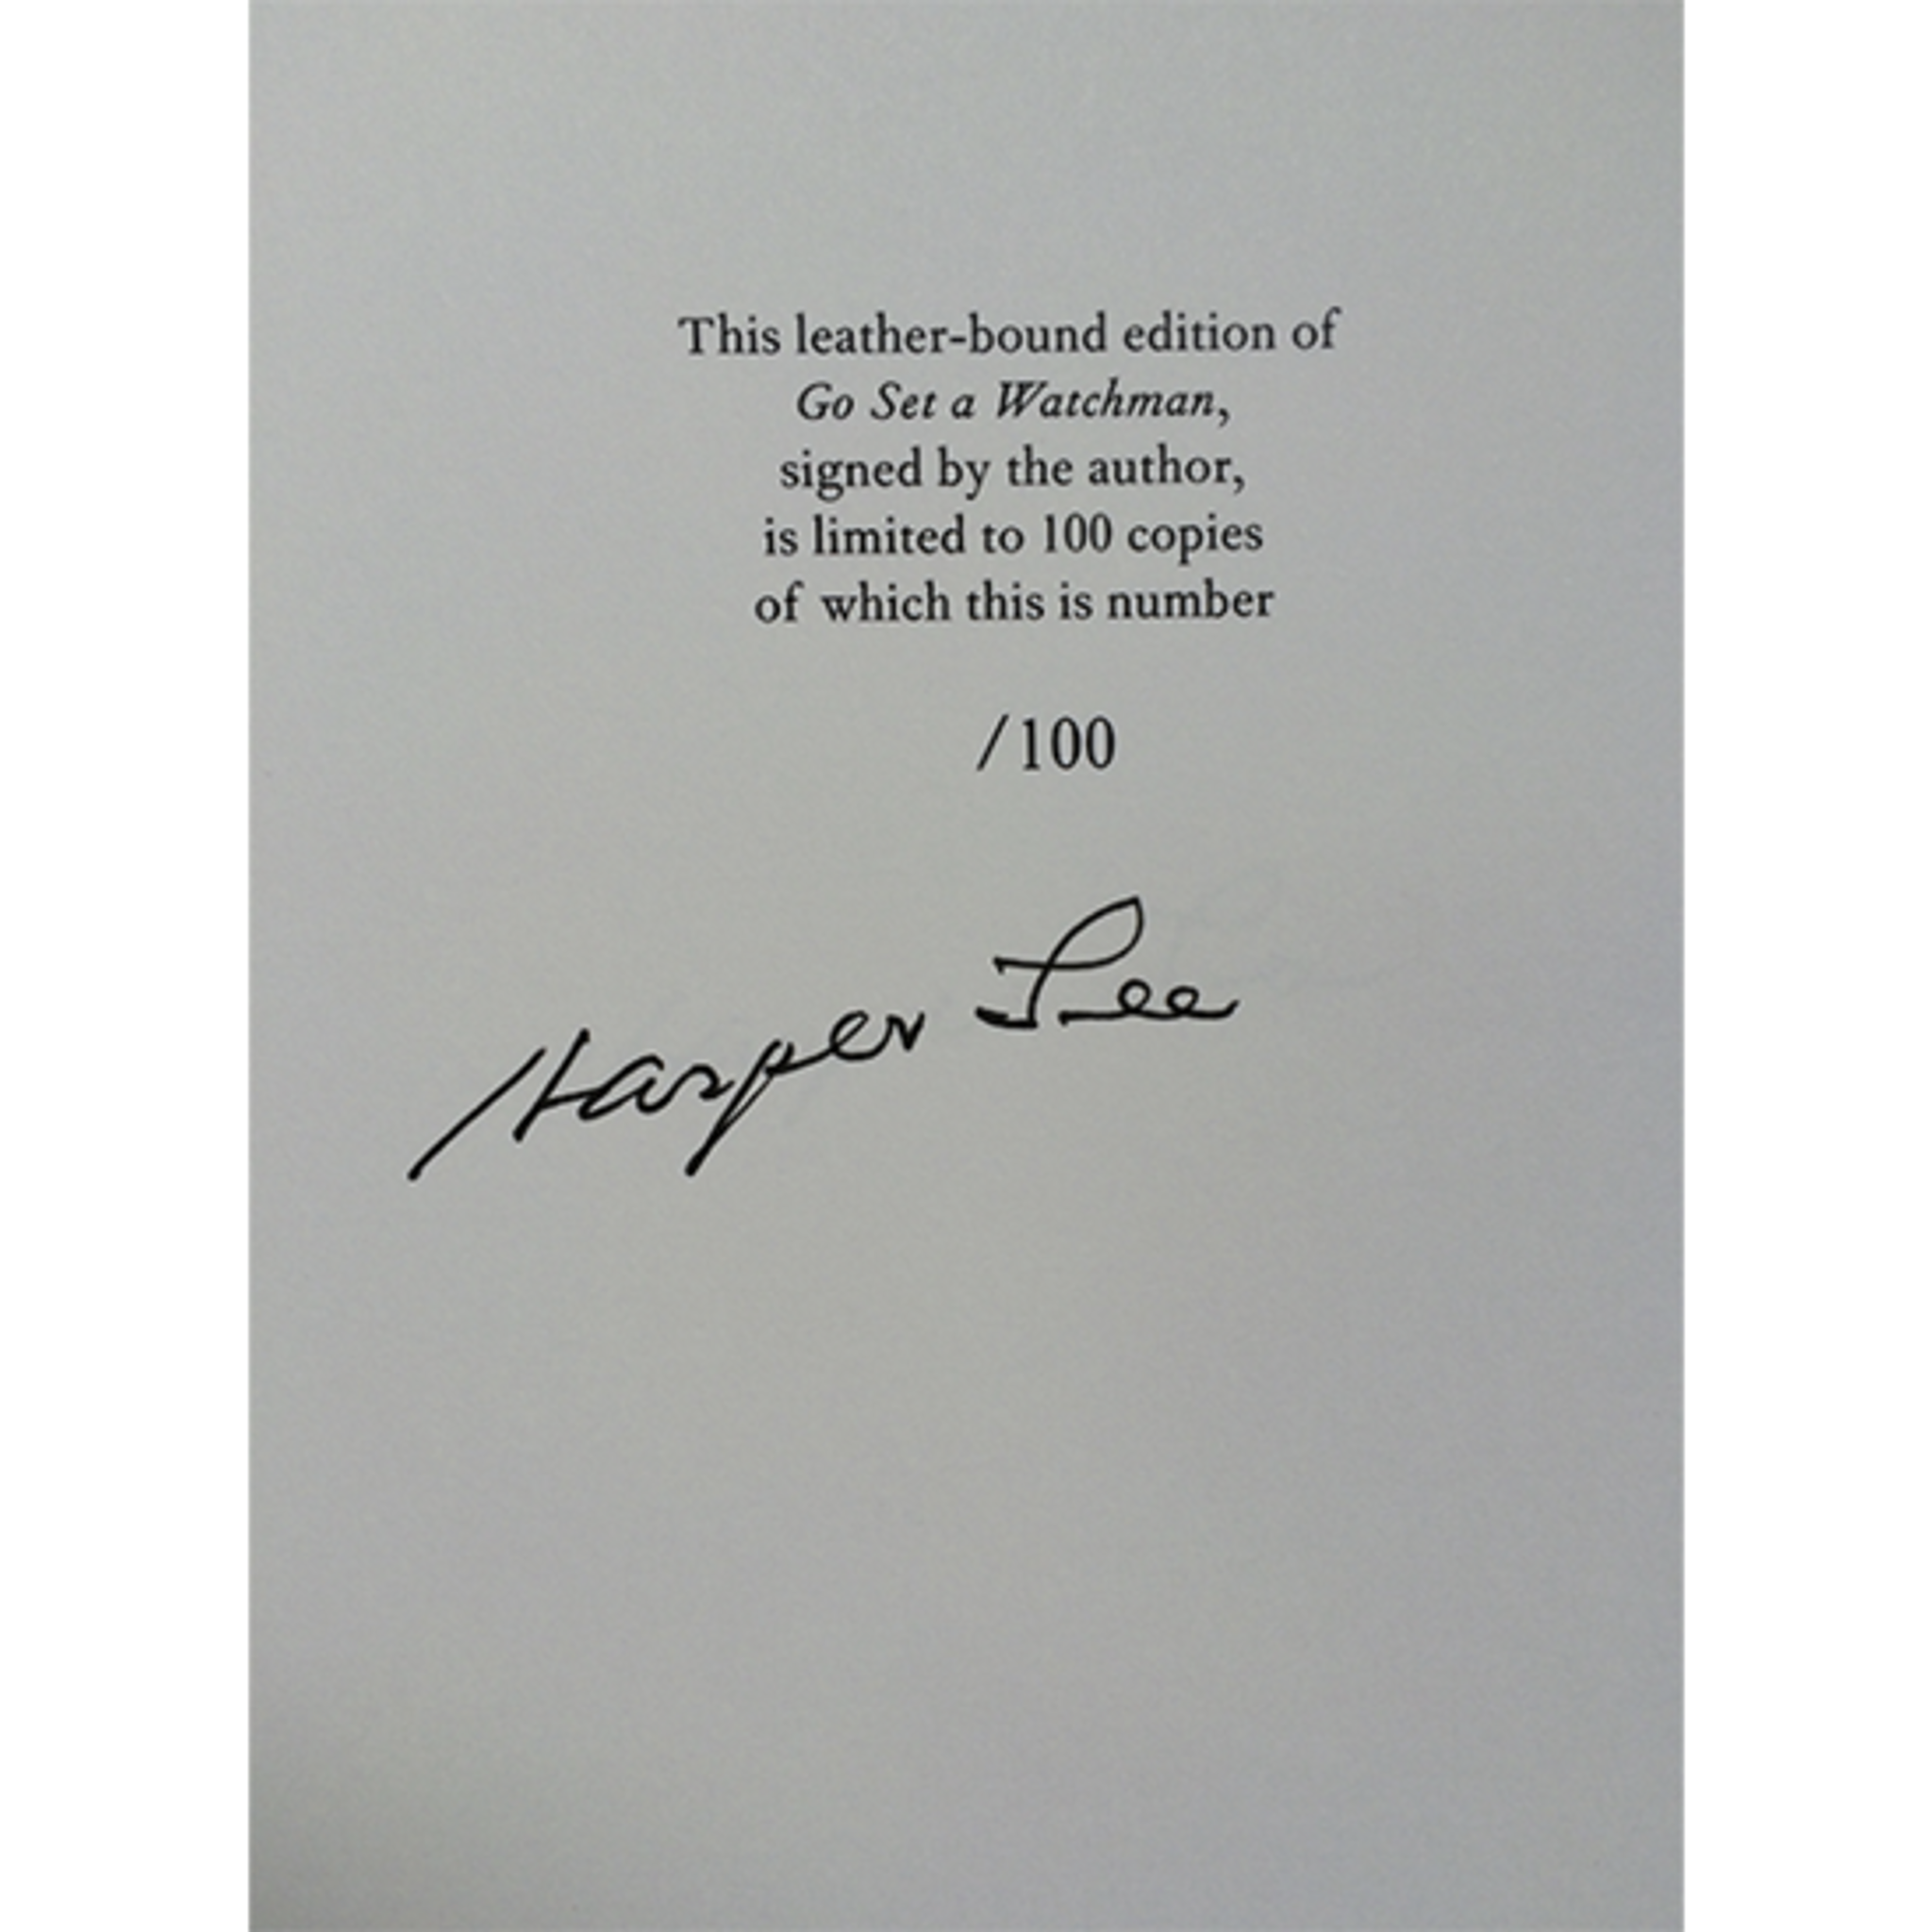 Go Set A Watchman Limited Signed Edition by Harper Lee